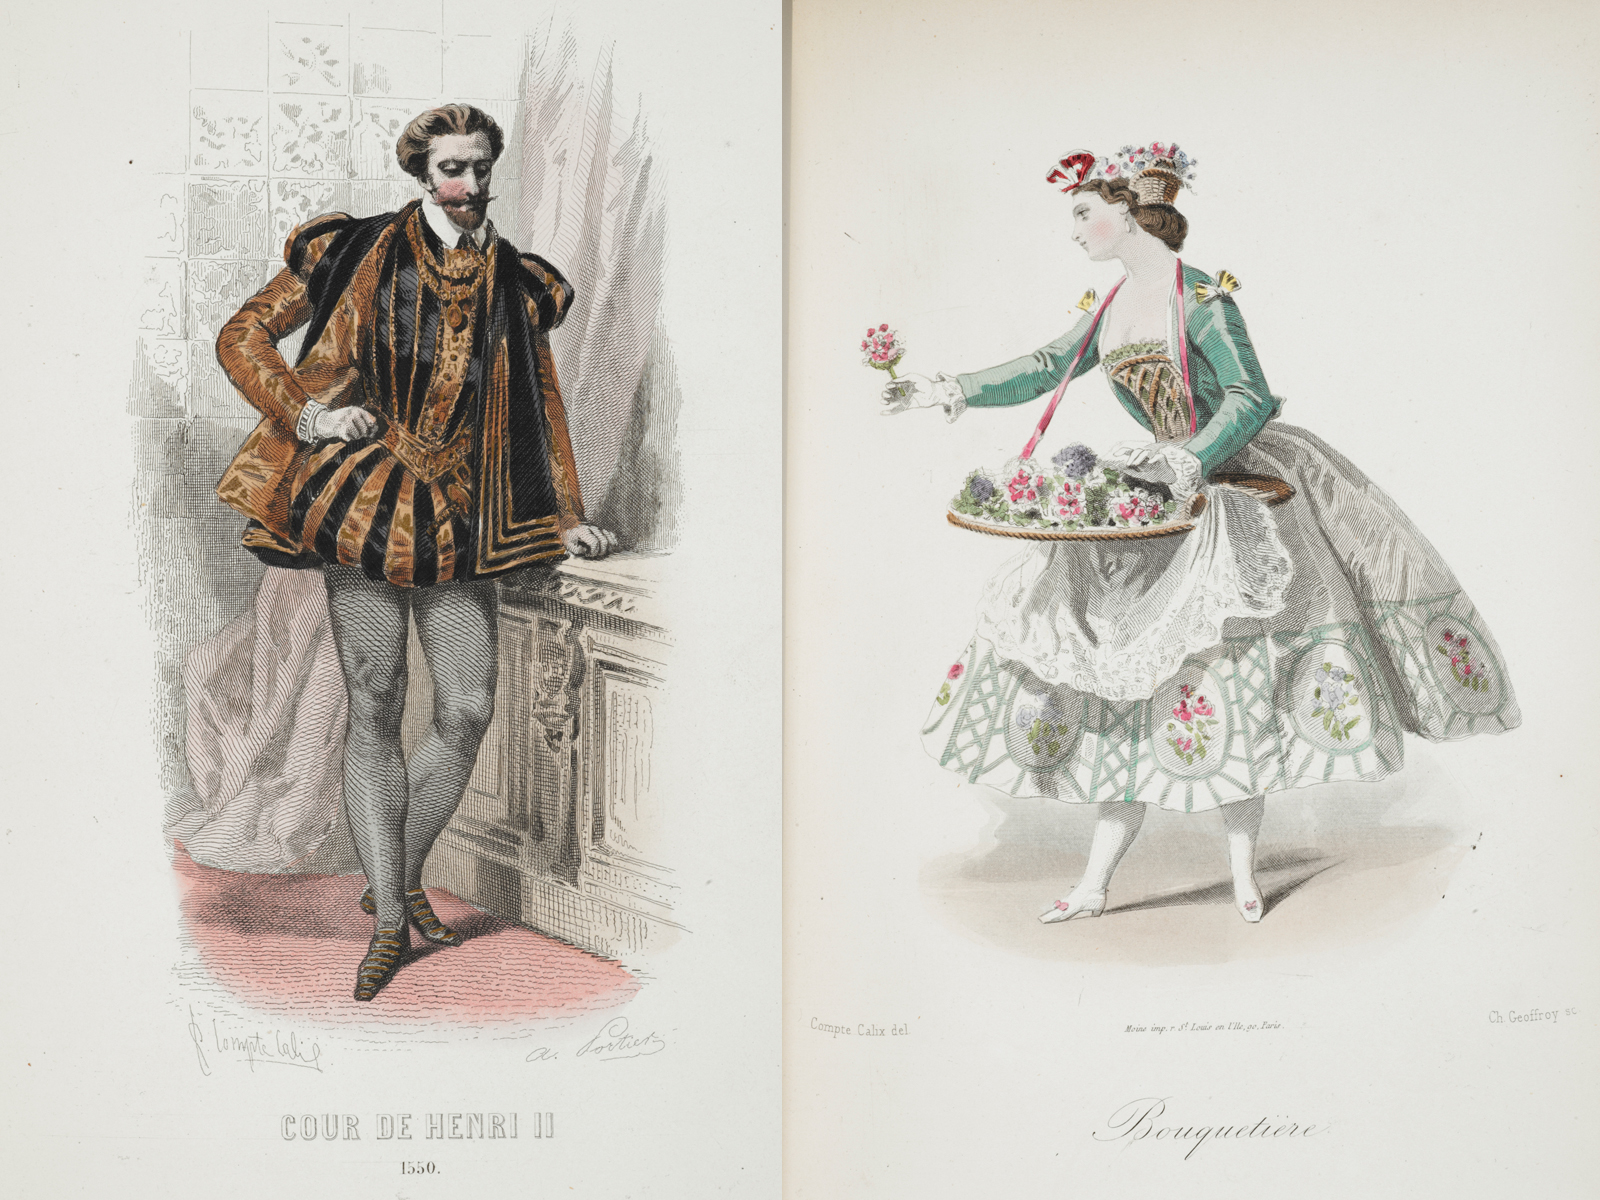 Coloured plates extracted from "Les Modes Parisiennes" cover image